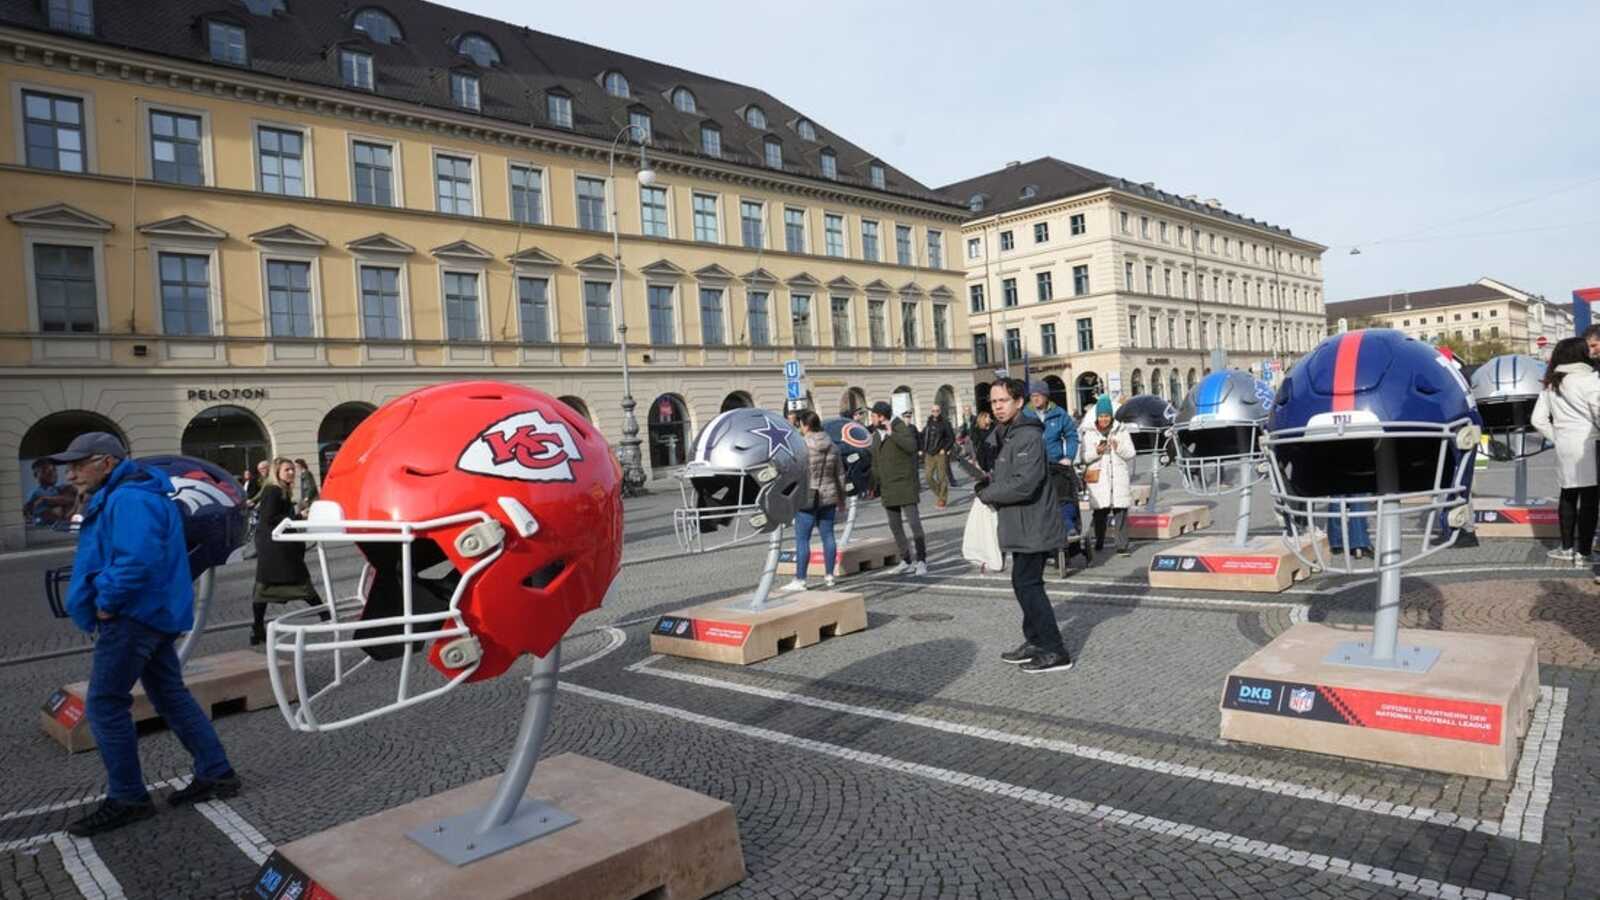 Roger Goodell: ‘At least’ three more games coming to Germany